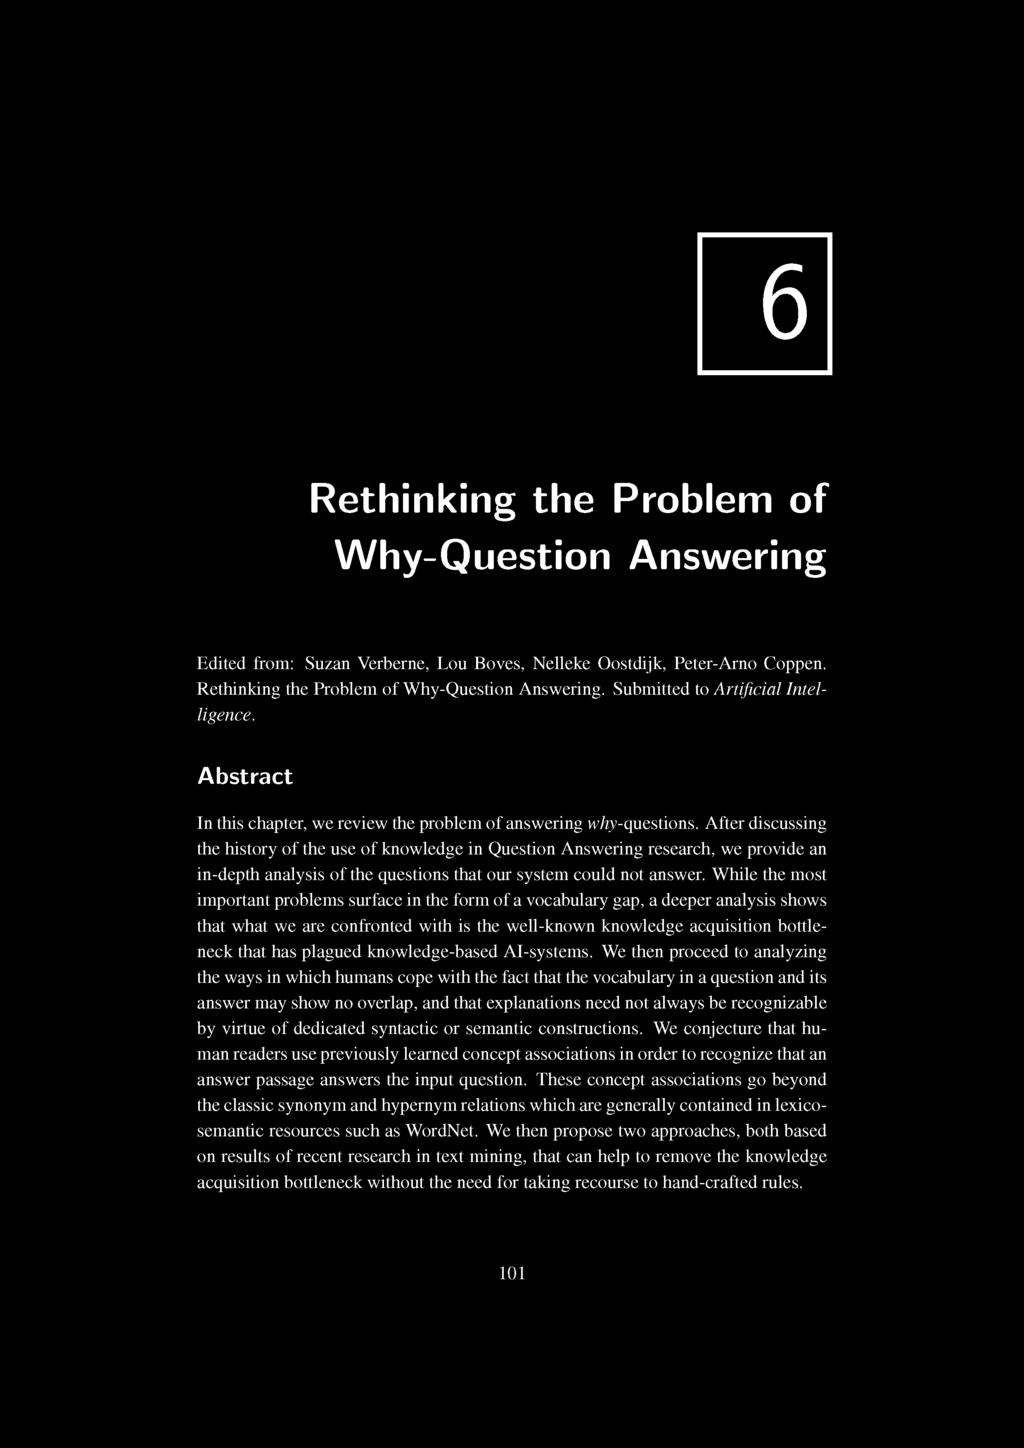 After discussing the history of the use of knowledge in Question Answering research, we provide an in-depth analysis of the questions that our system could not answer.